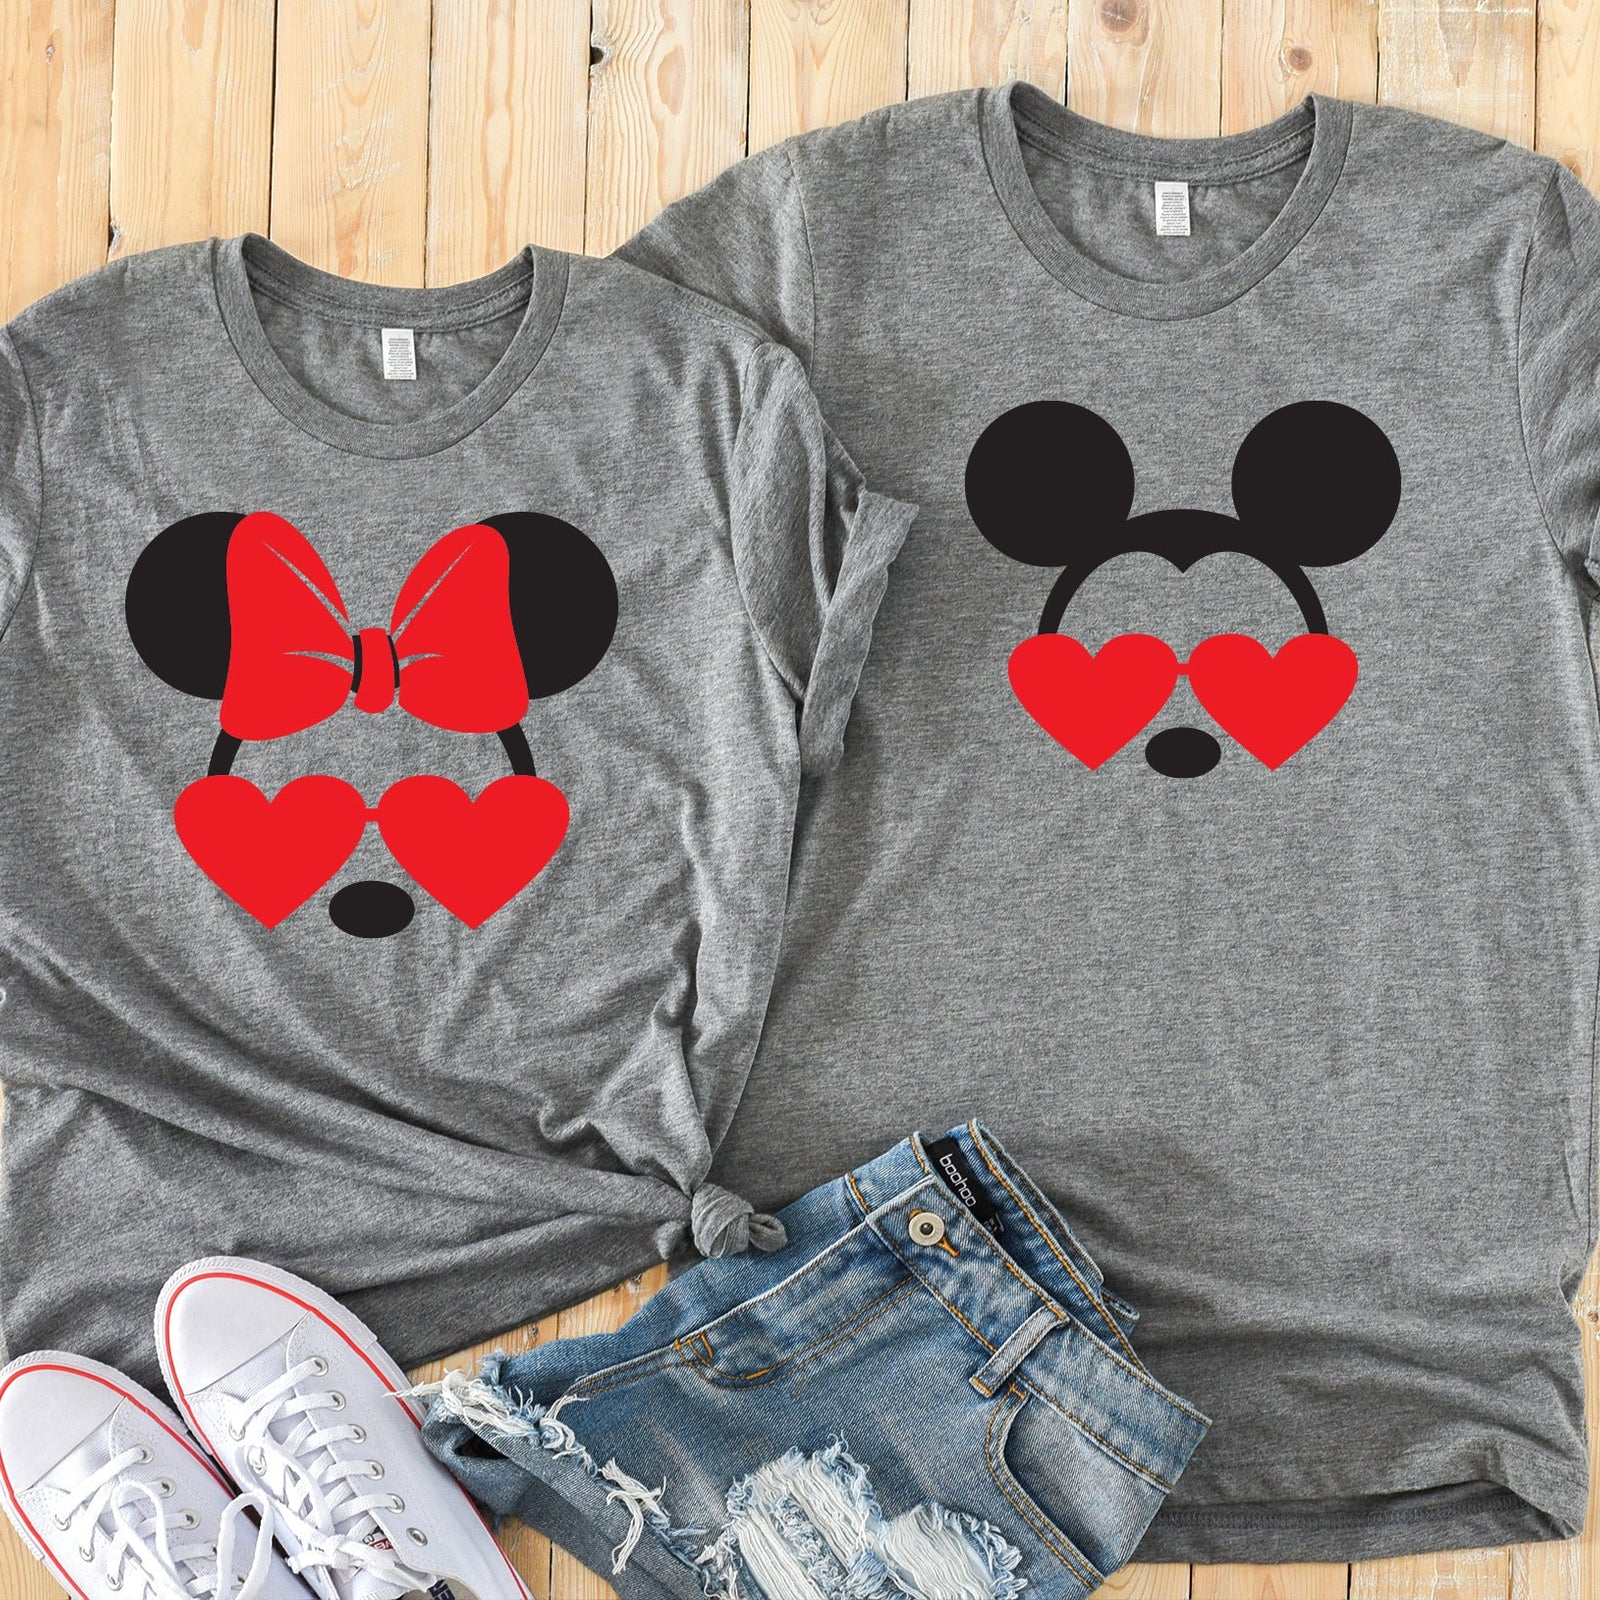 Minnie and Mickey Valentine's Day T Shirts - Love Shirts - Disney Couples - Matching Shirts